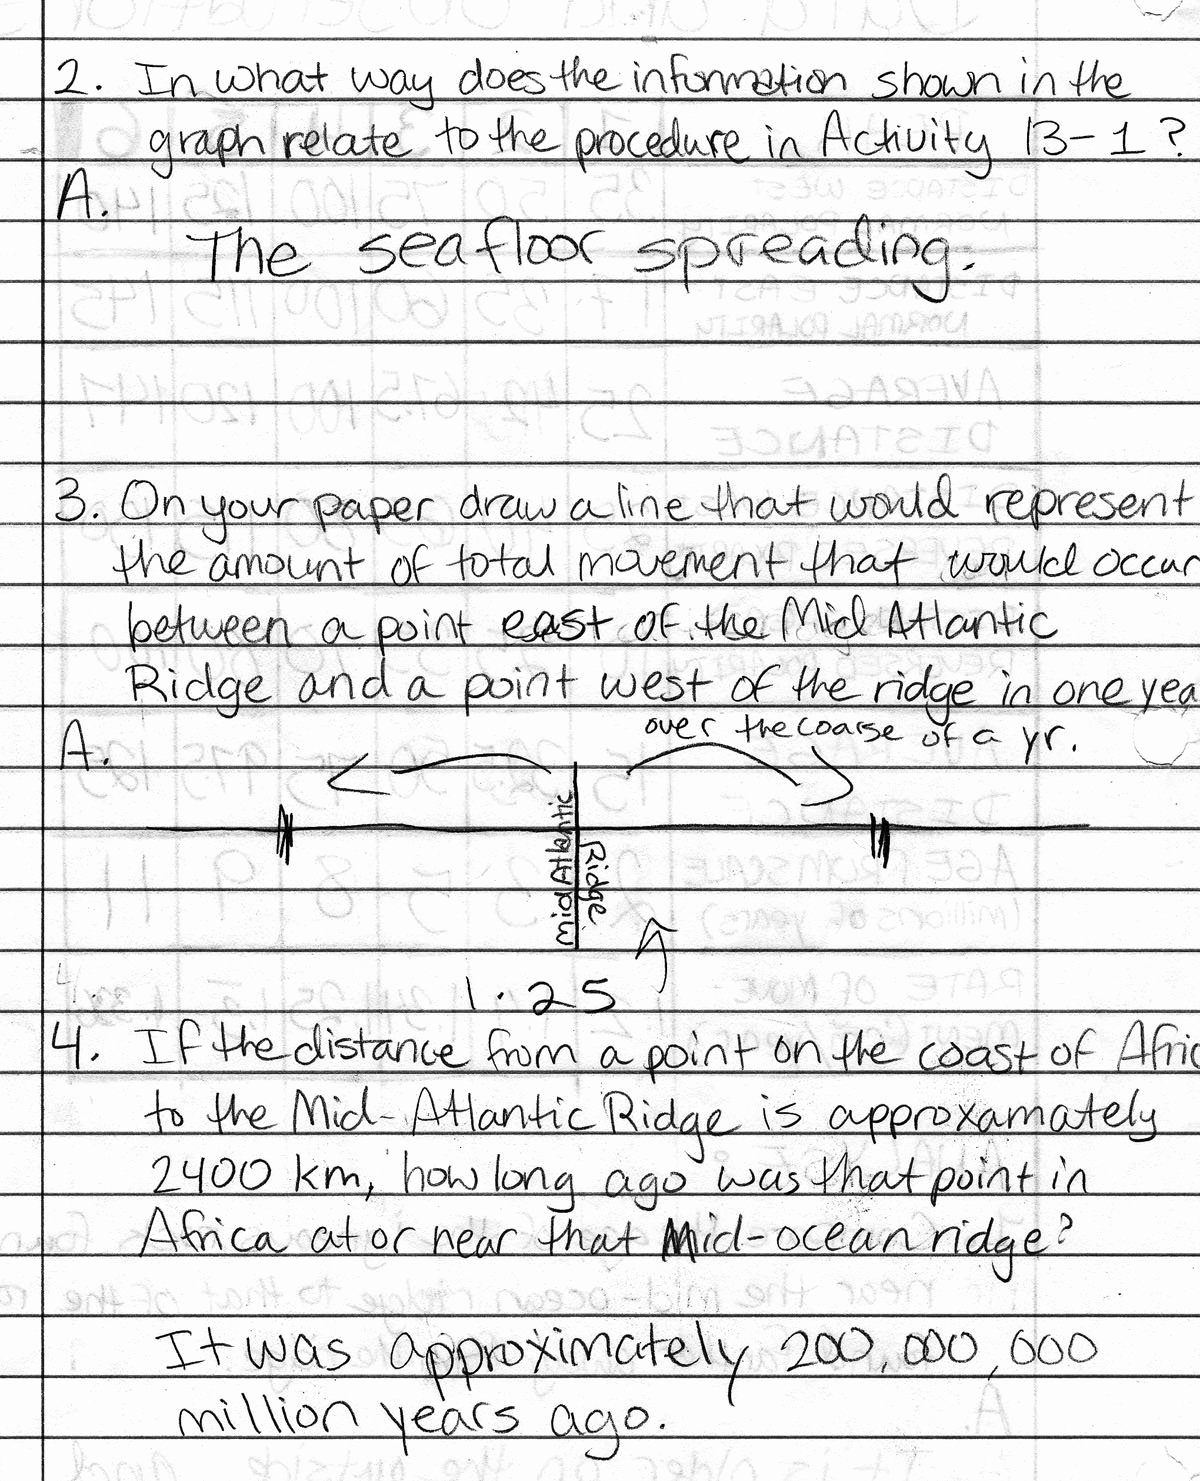 Science World Worksheet Answers Inspirational Sea Floor Spreading Worksheet Answers Seafloor Spreading